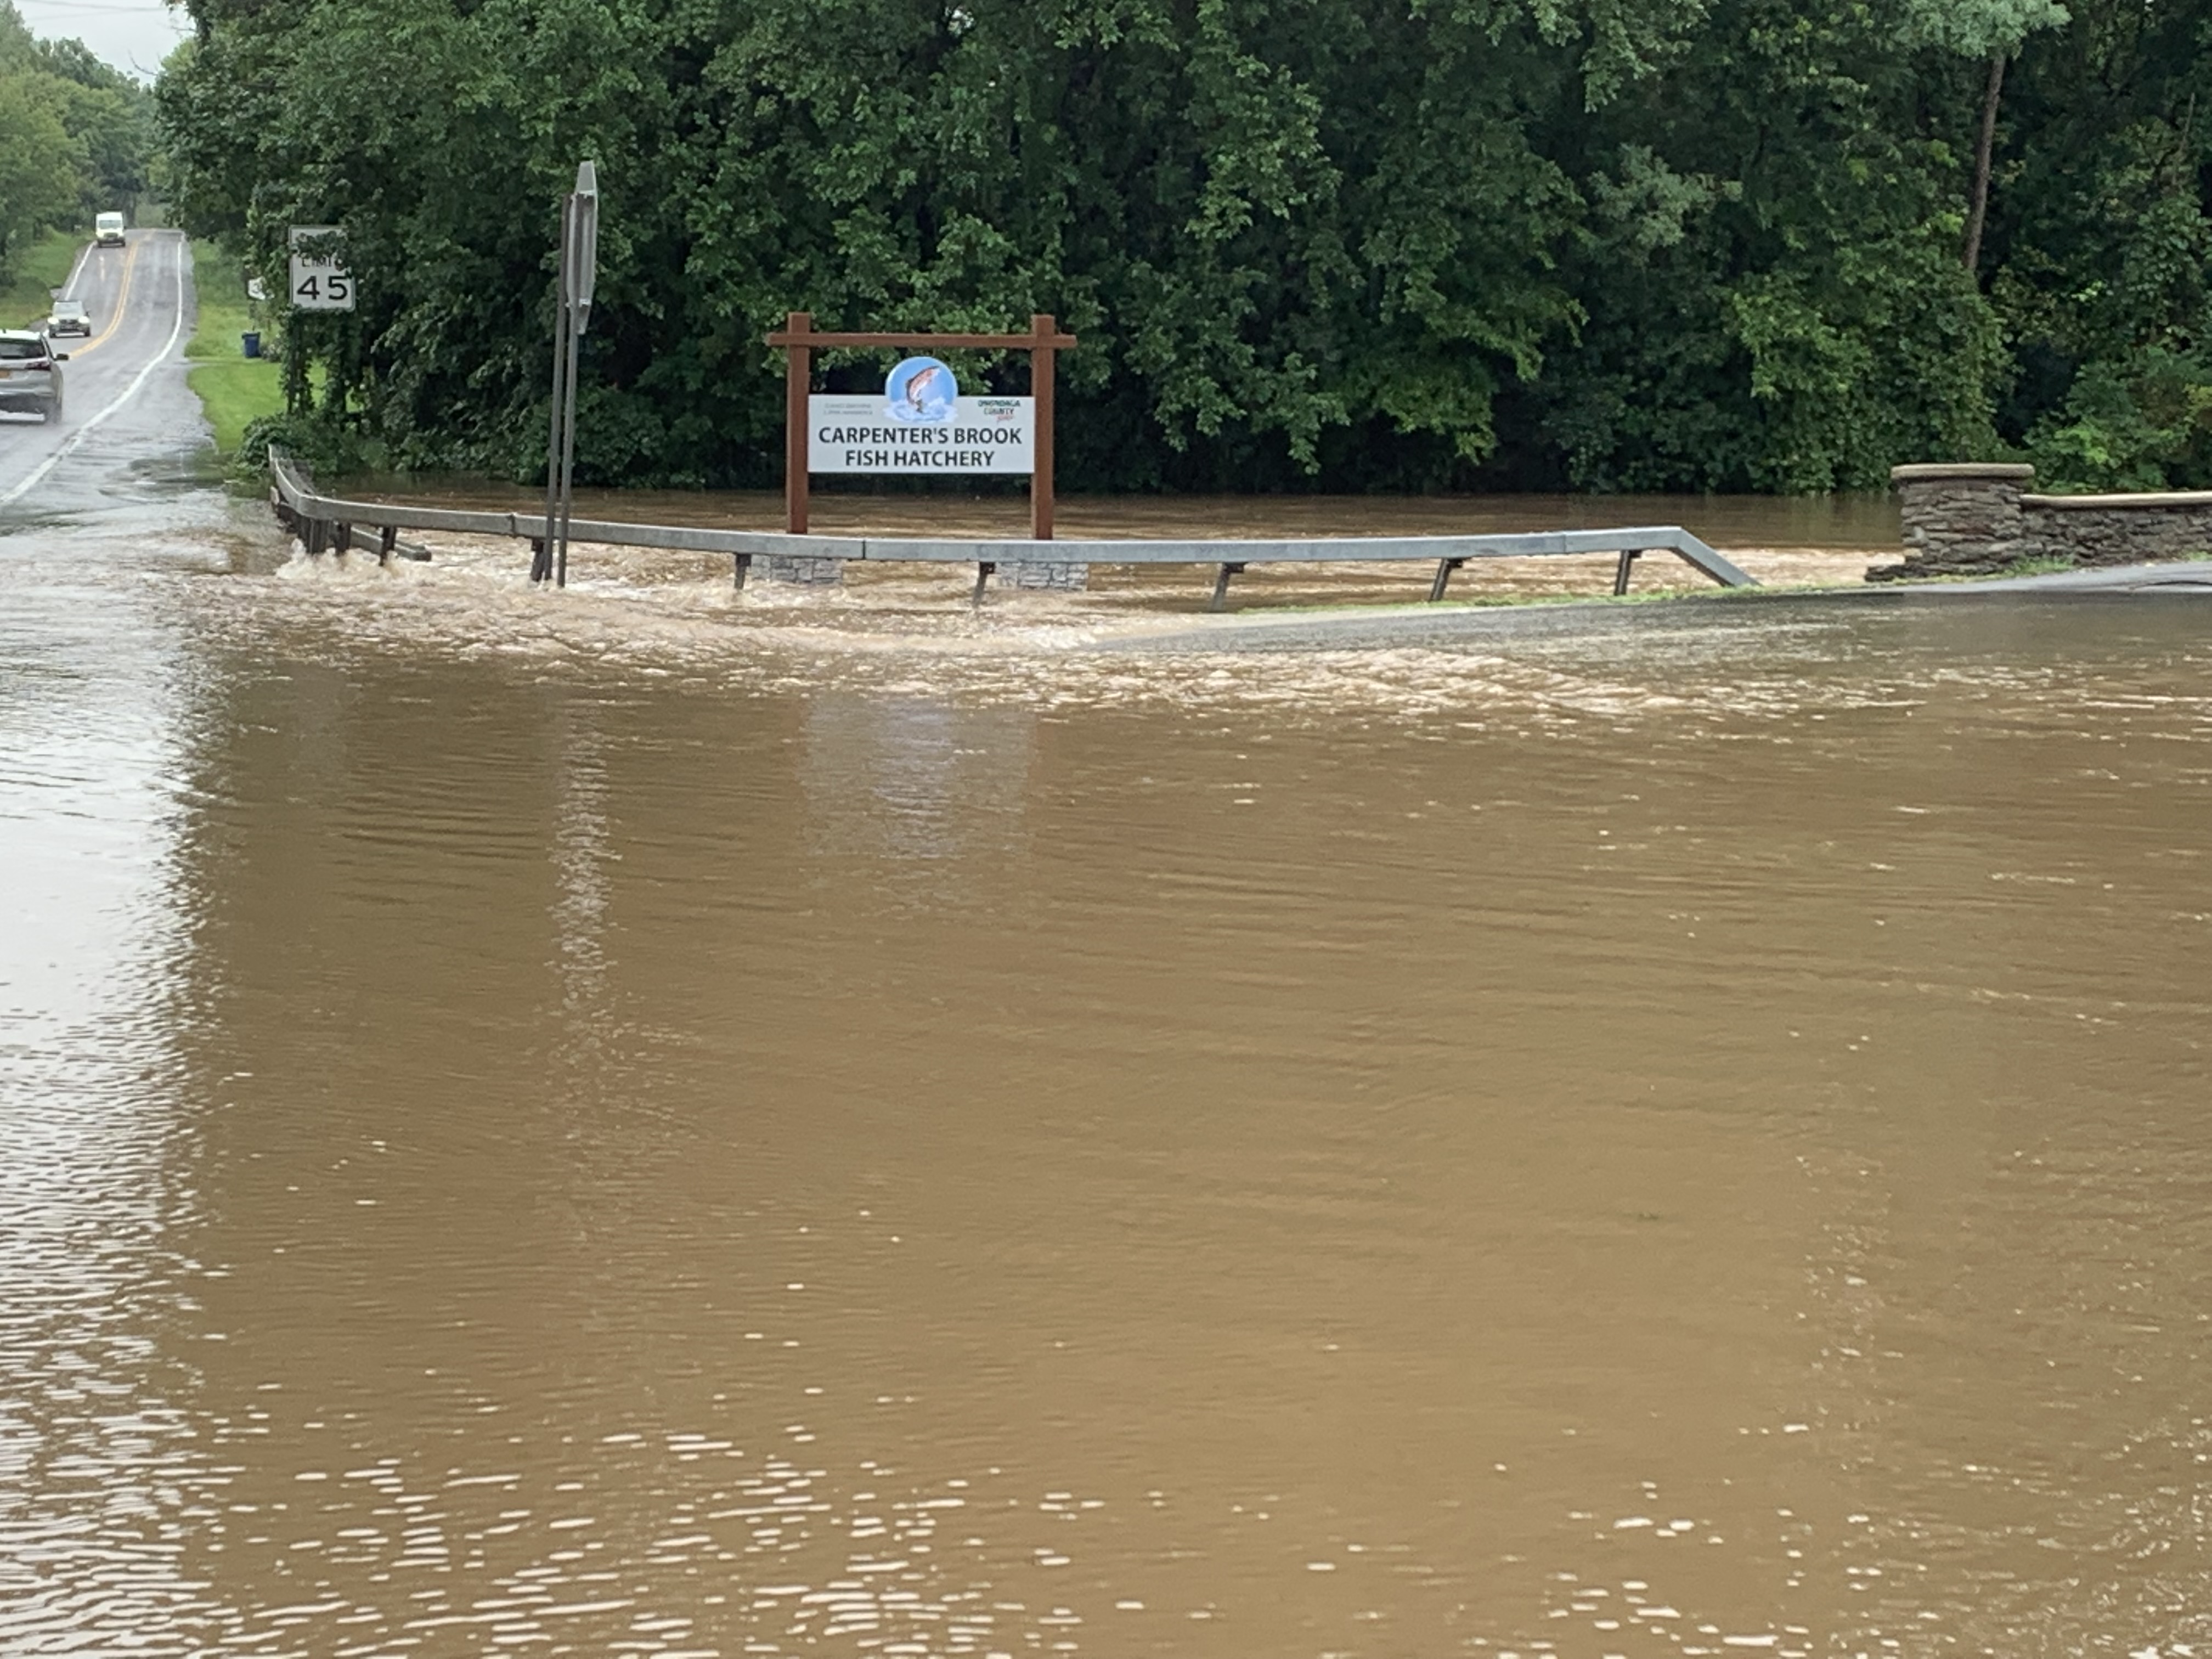 The entry to Carpenter’s Brook Fish Hatchery on Route 321 in Elbridge remains flooded Thursday, Aug. 19, 2021.